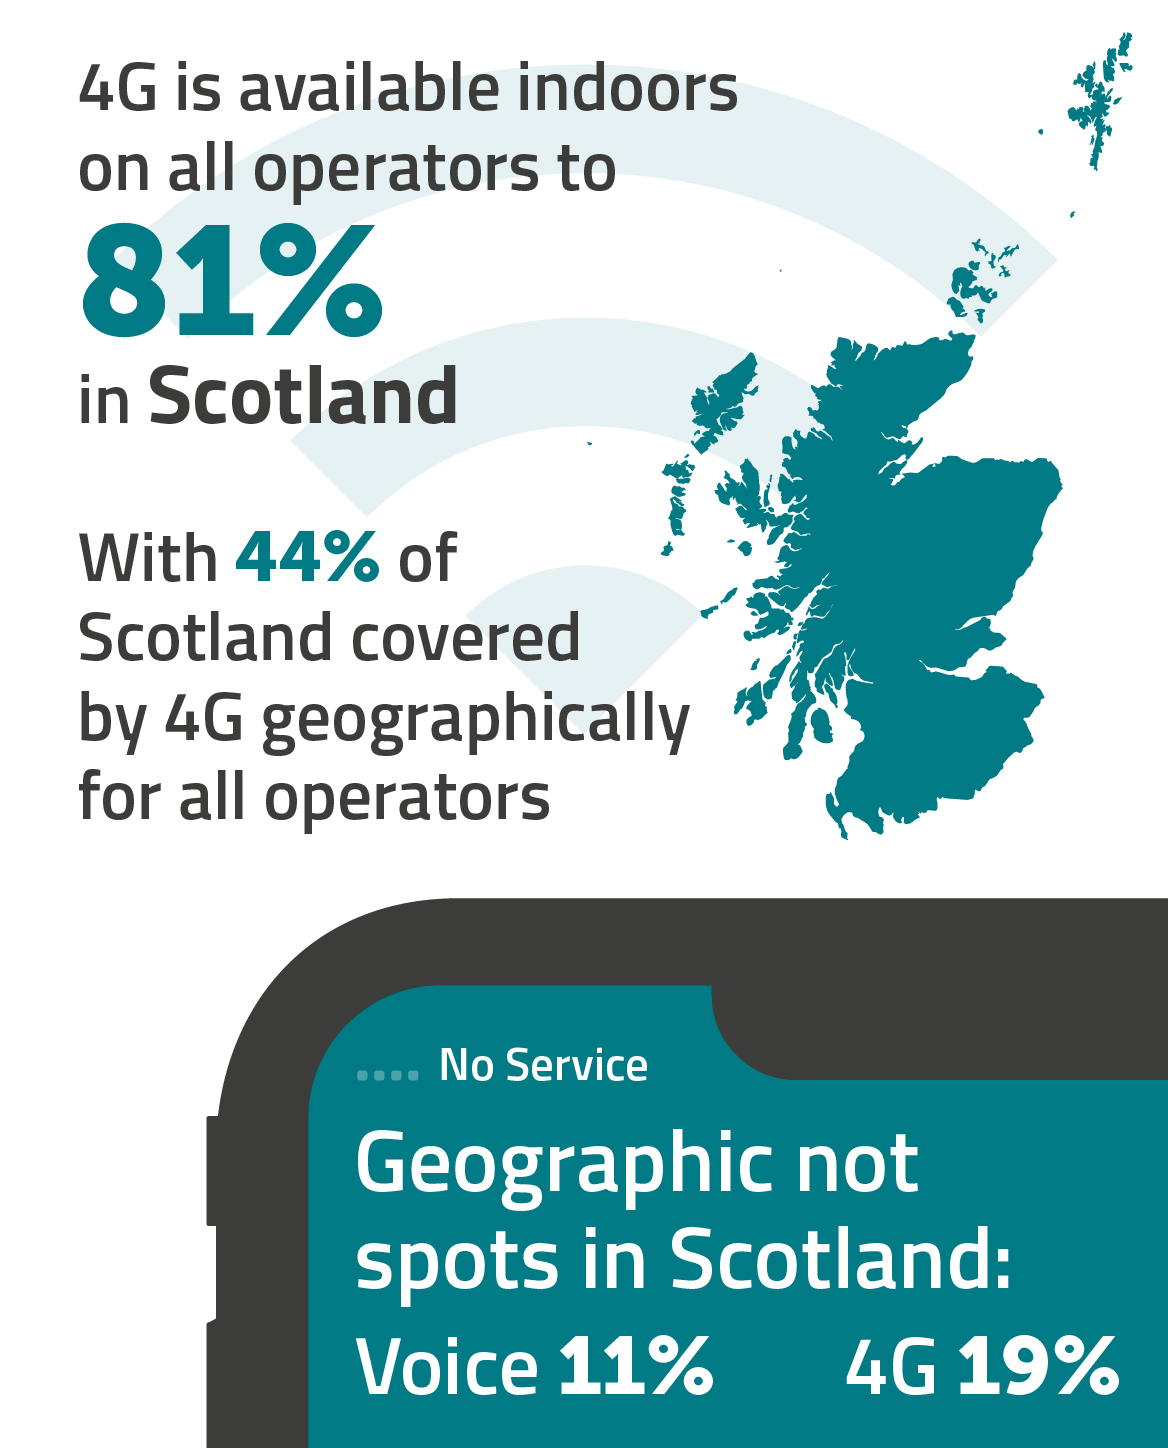 4G is available indoors on all operators to 81% in Scotland.